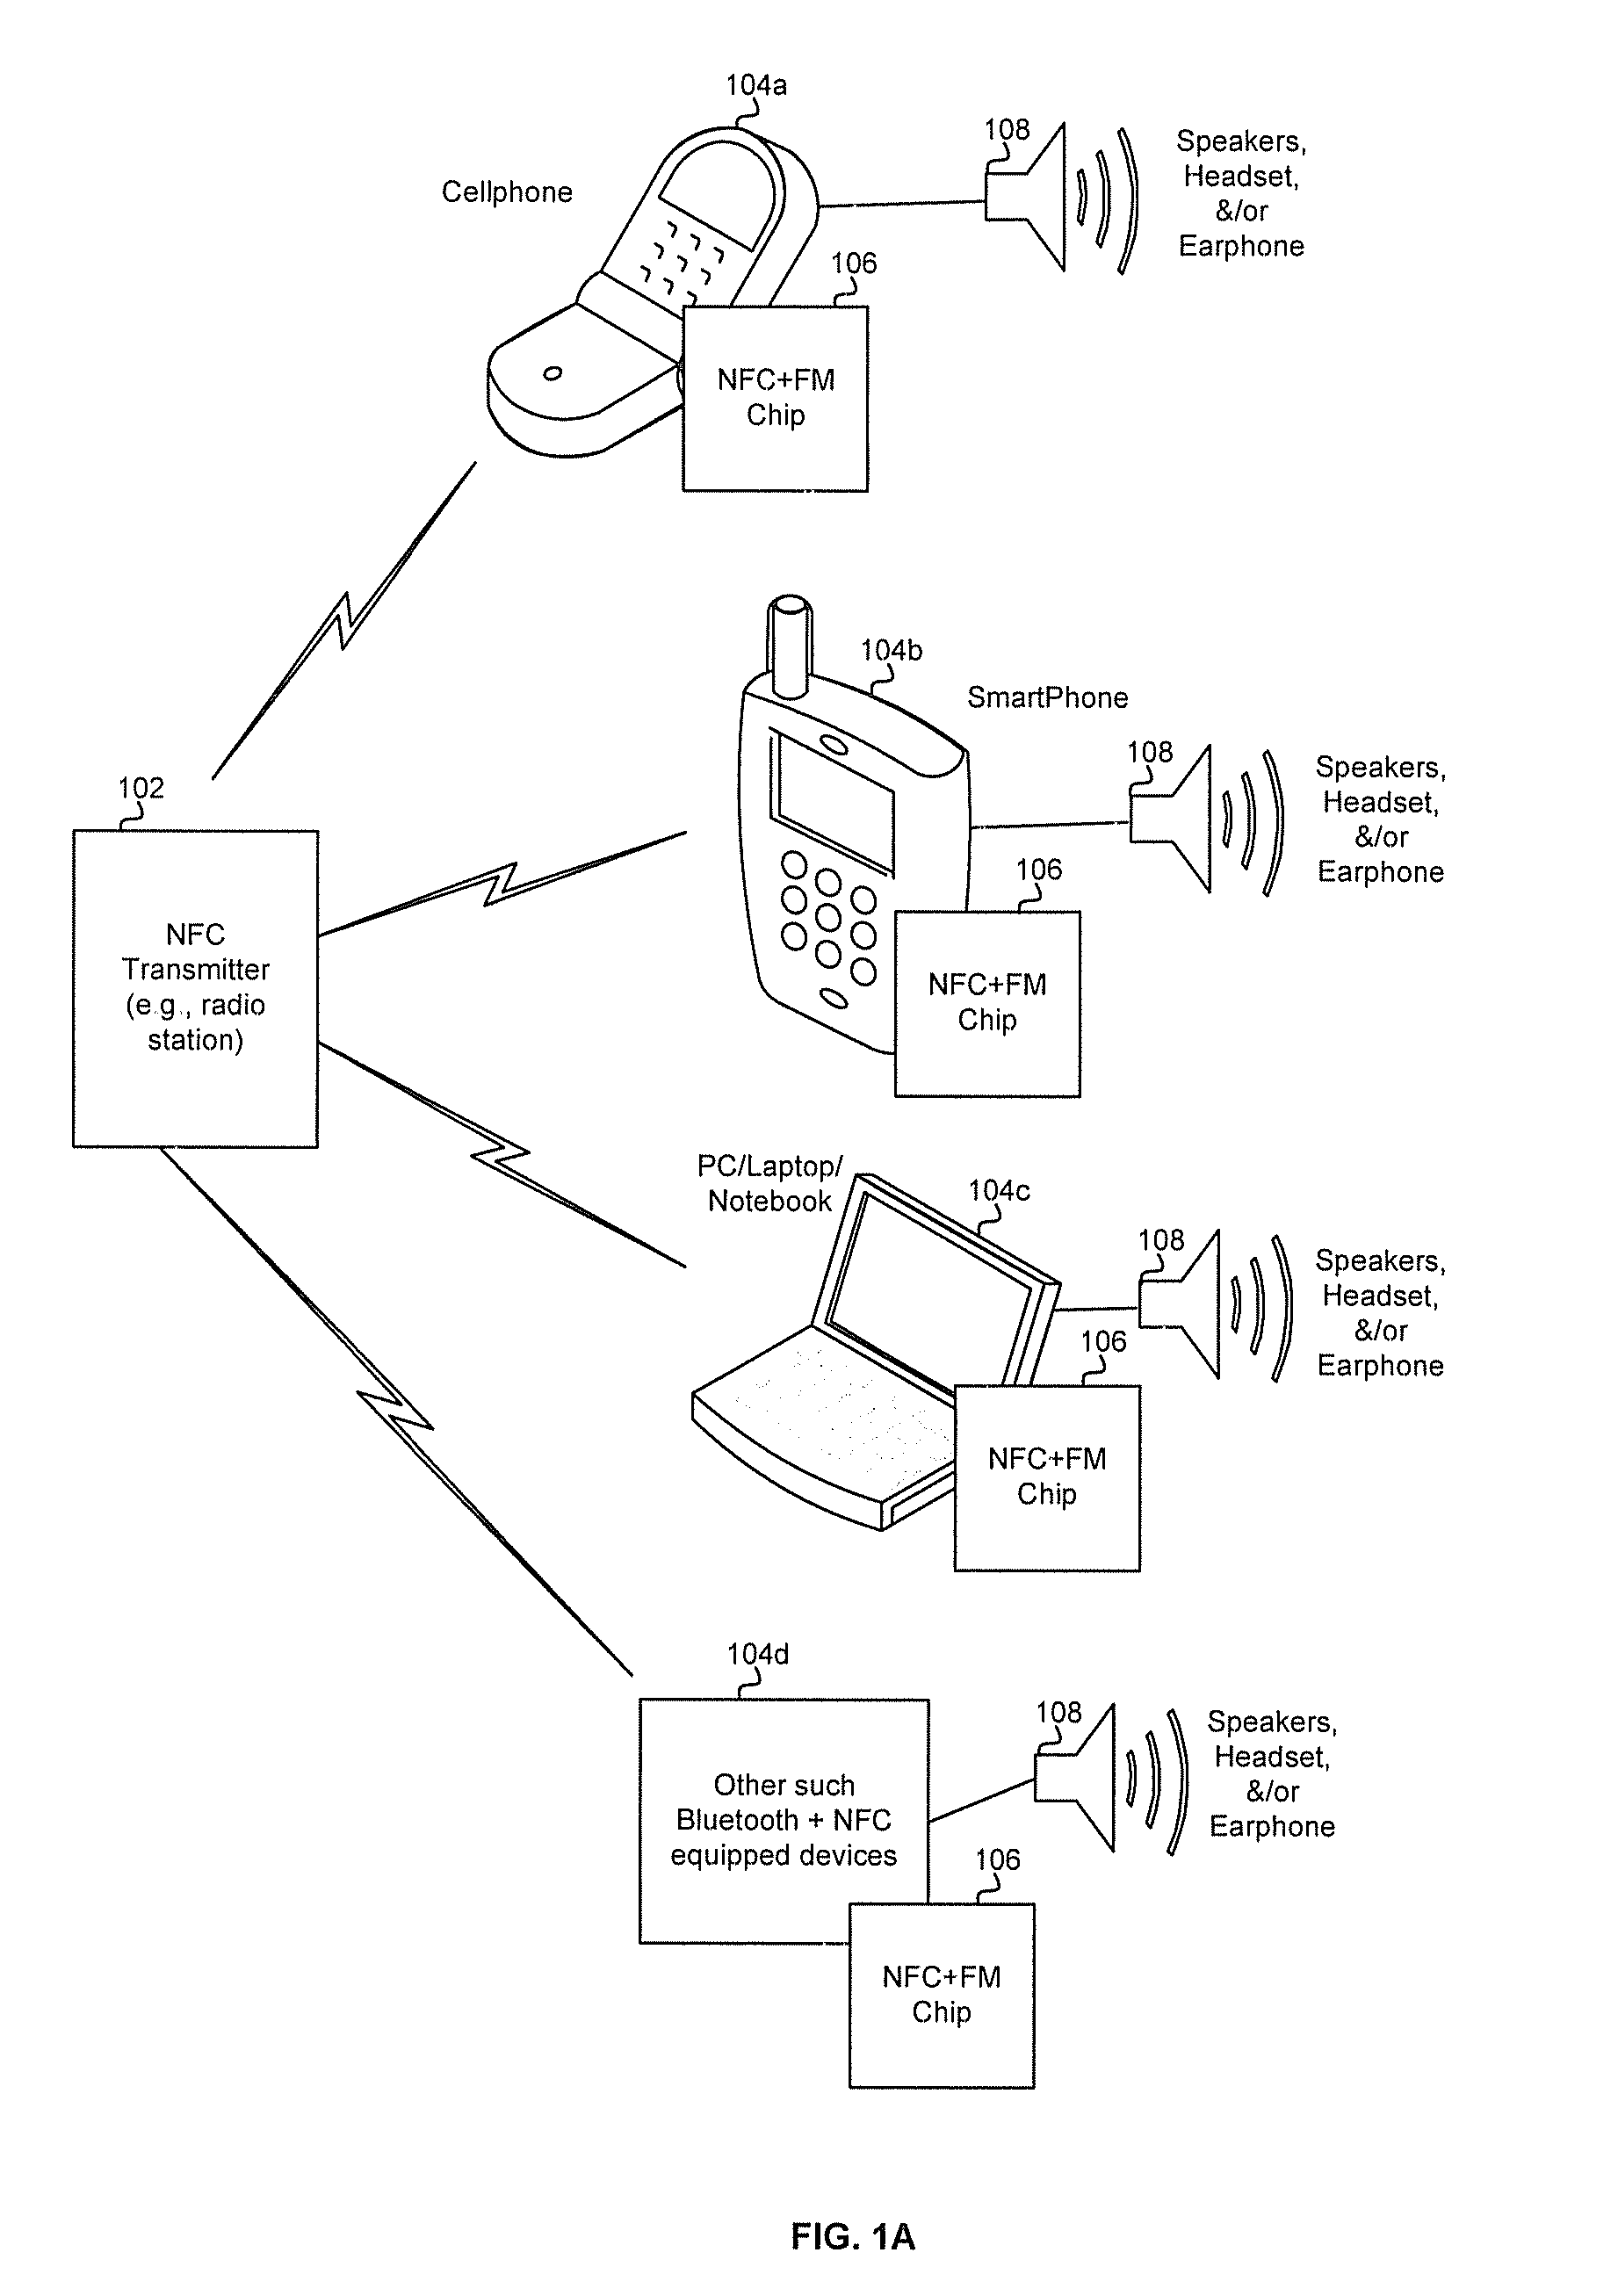 Method and System For a Transceiver For Bluetooth and Near Field Communication (NFC)